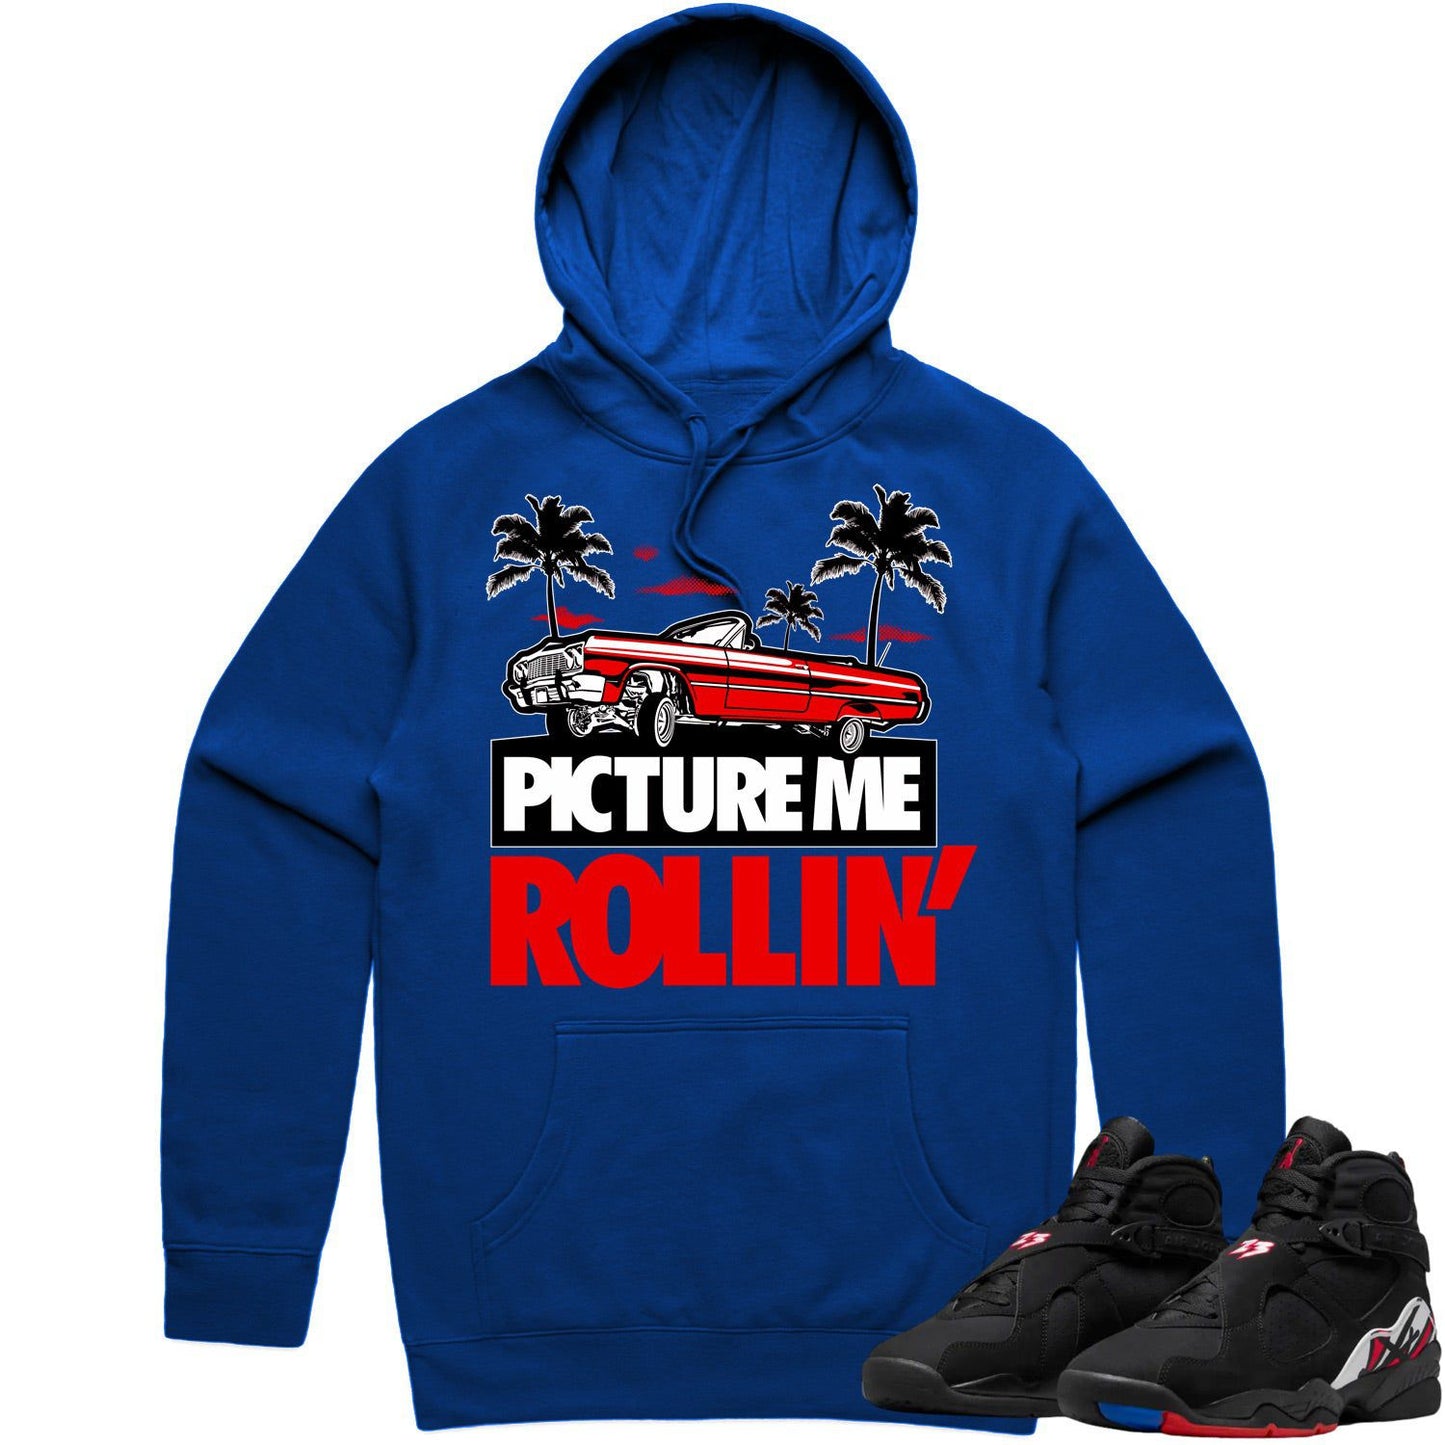 Playoff 8s Hoodie - Jordan 8 Playoffs Hoodie - Red Picture Me Rollin